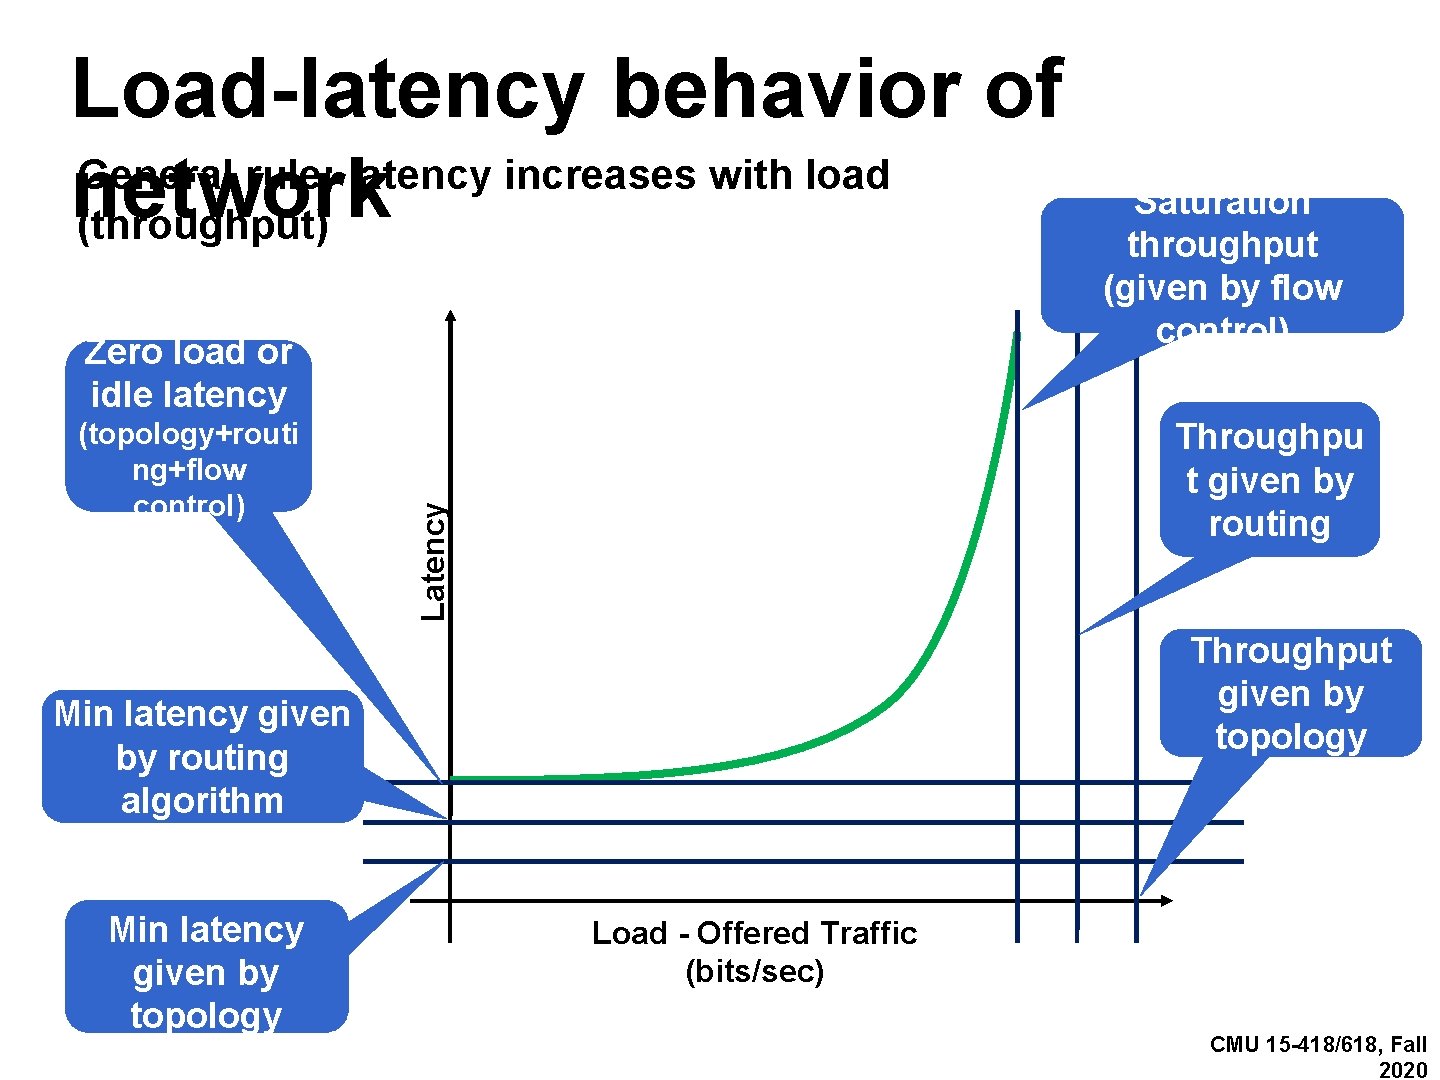 Load-latency behavior of General rule: latency increases with load network (throughput) Zero load or